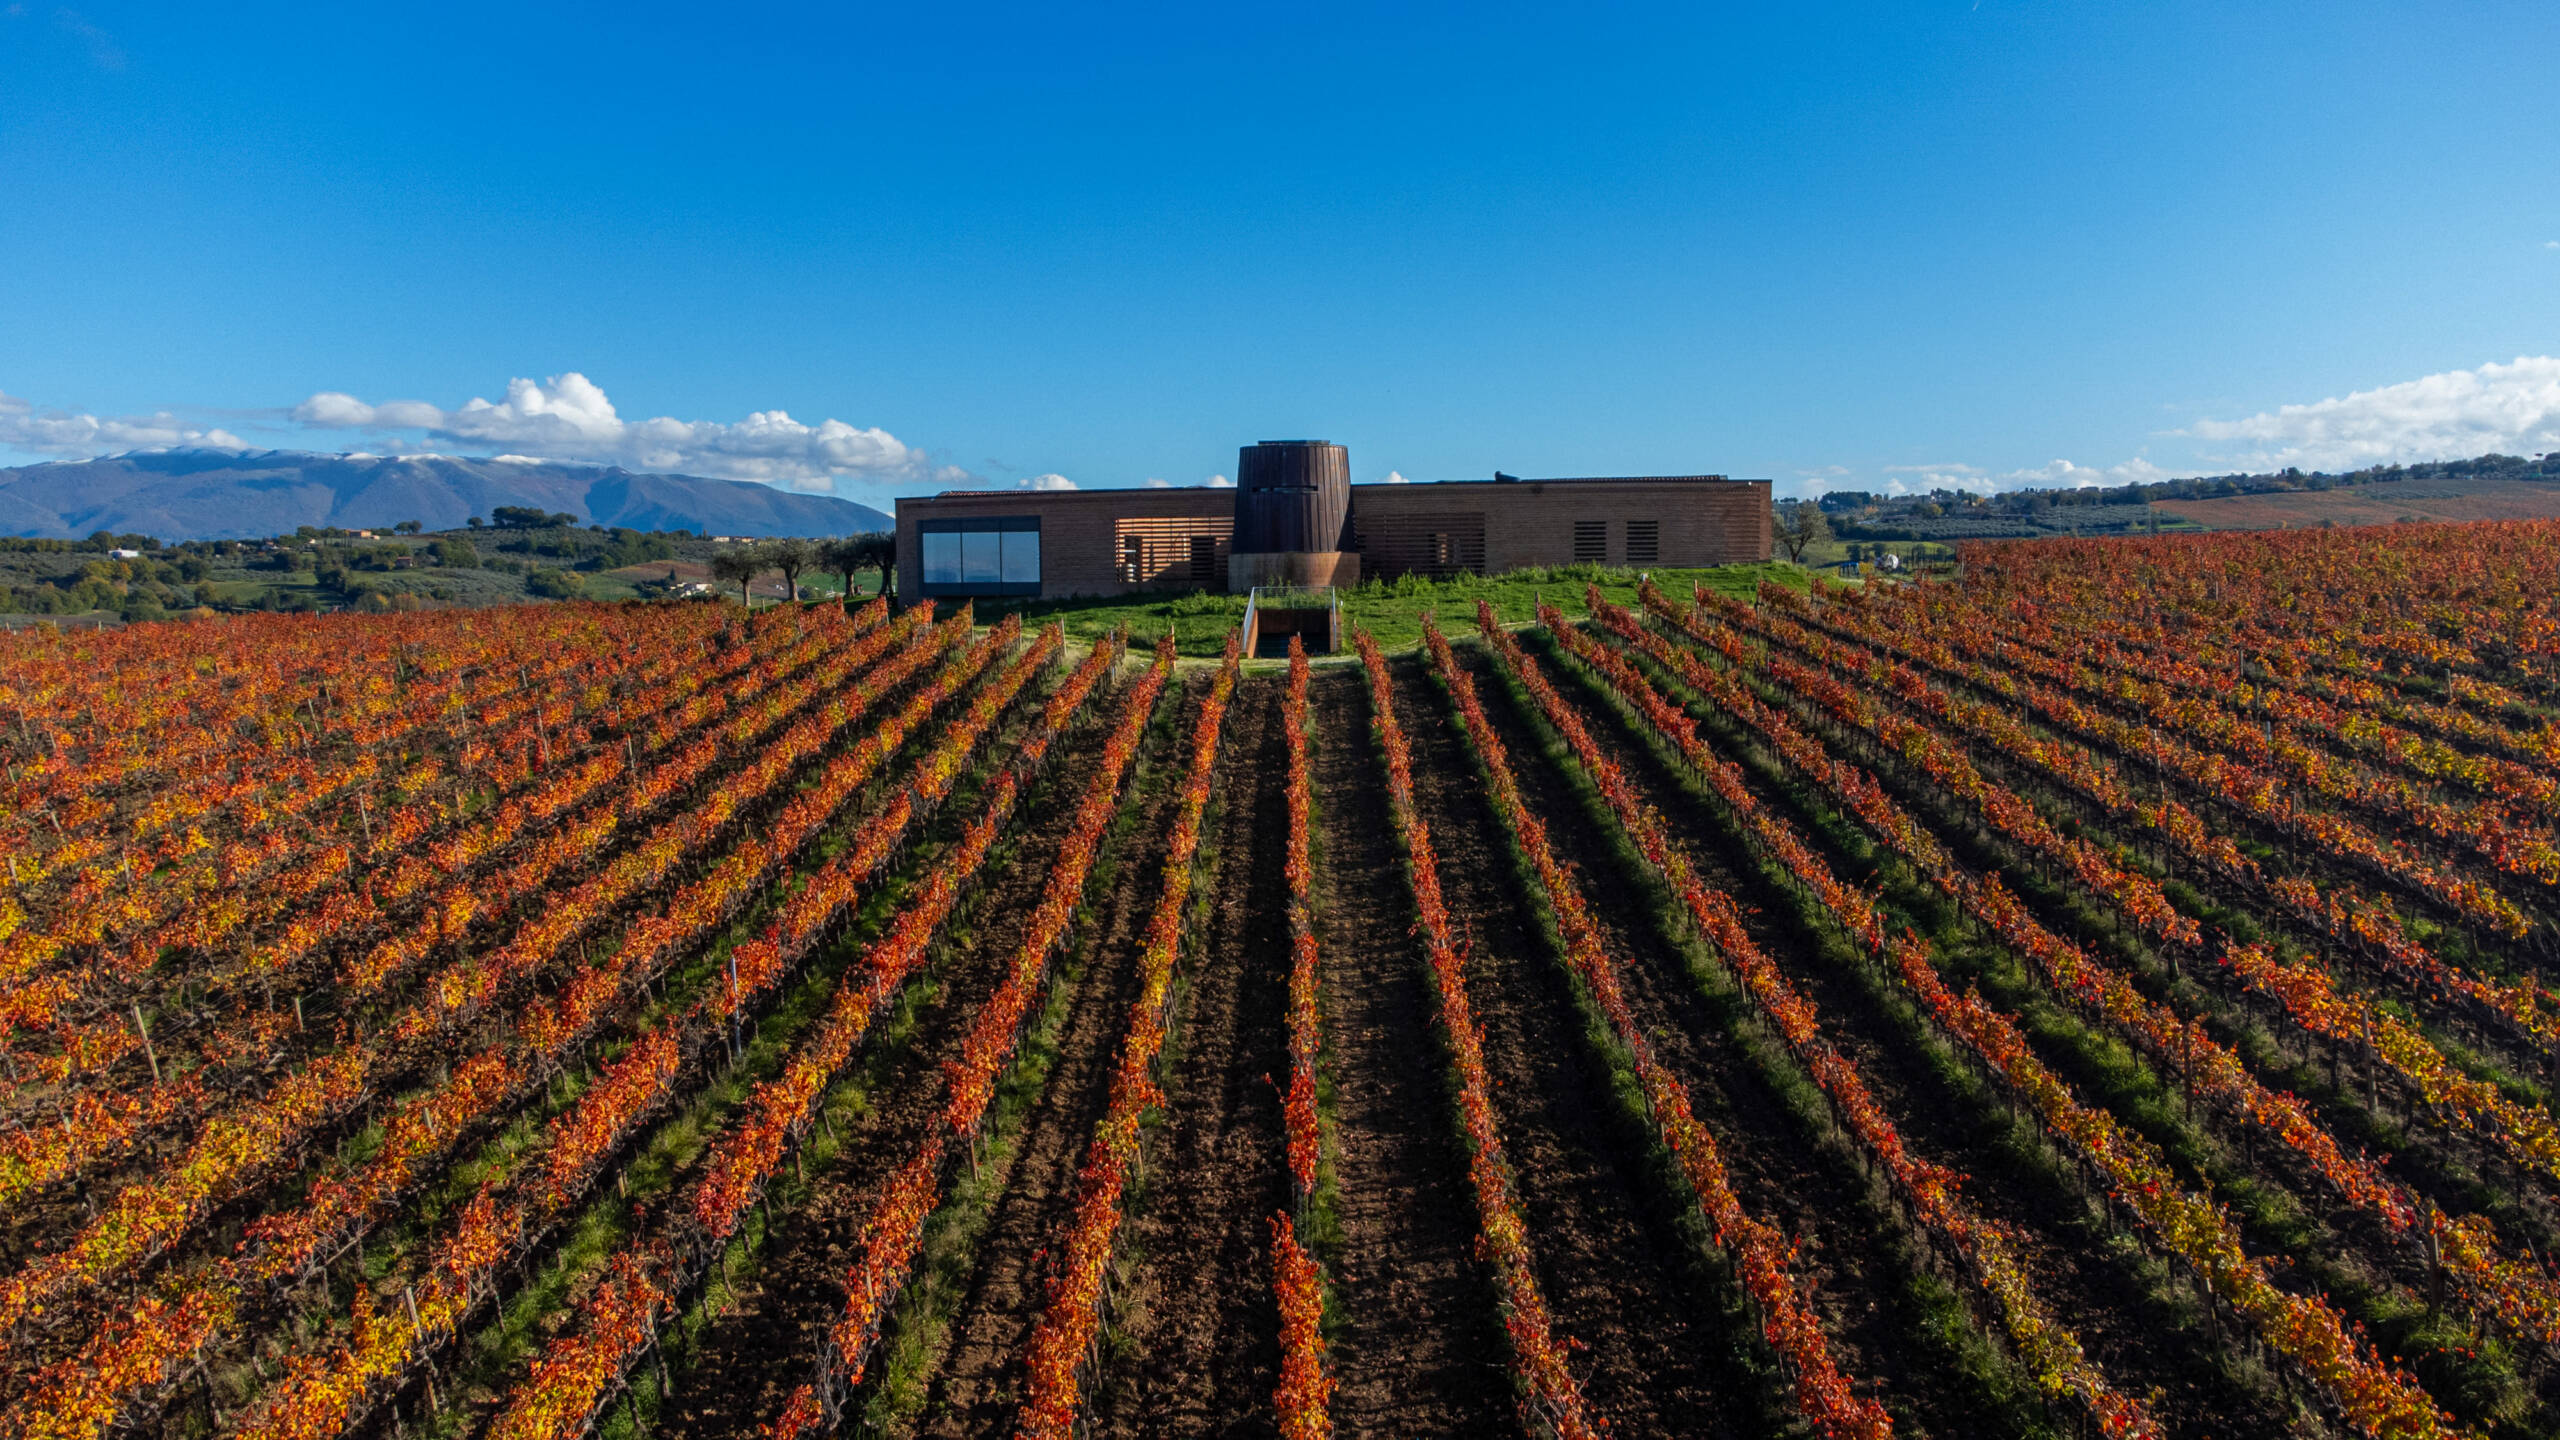 “Welcome to Montefalco” Tour and Tasting